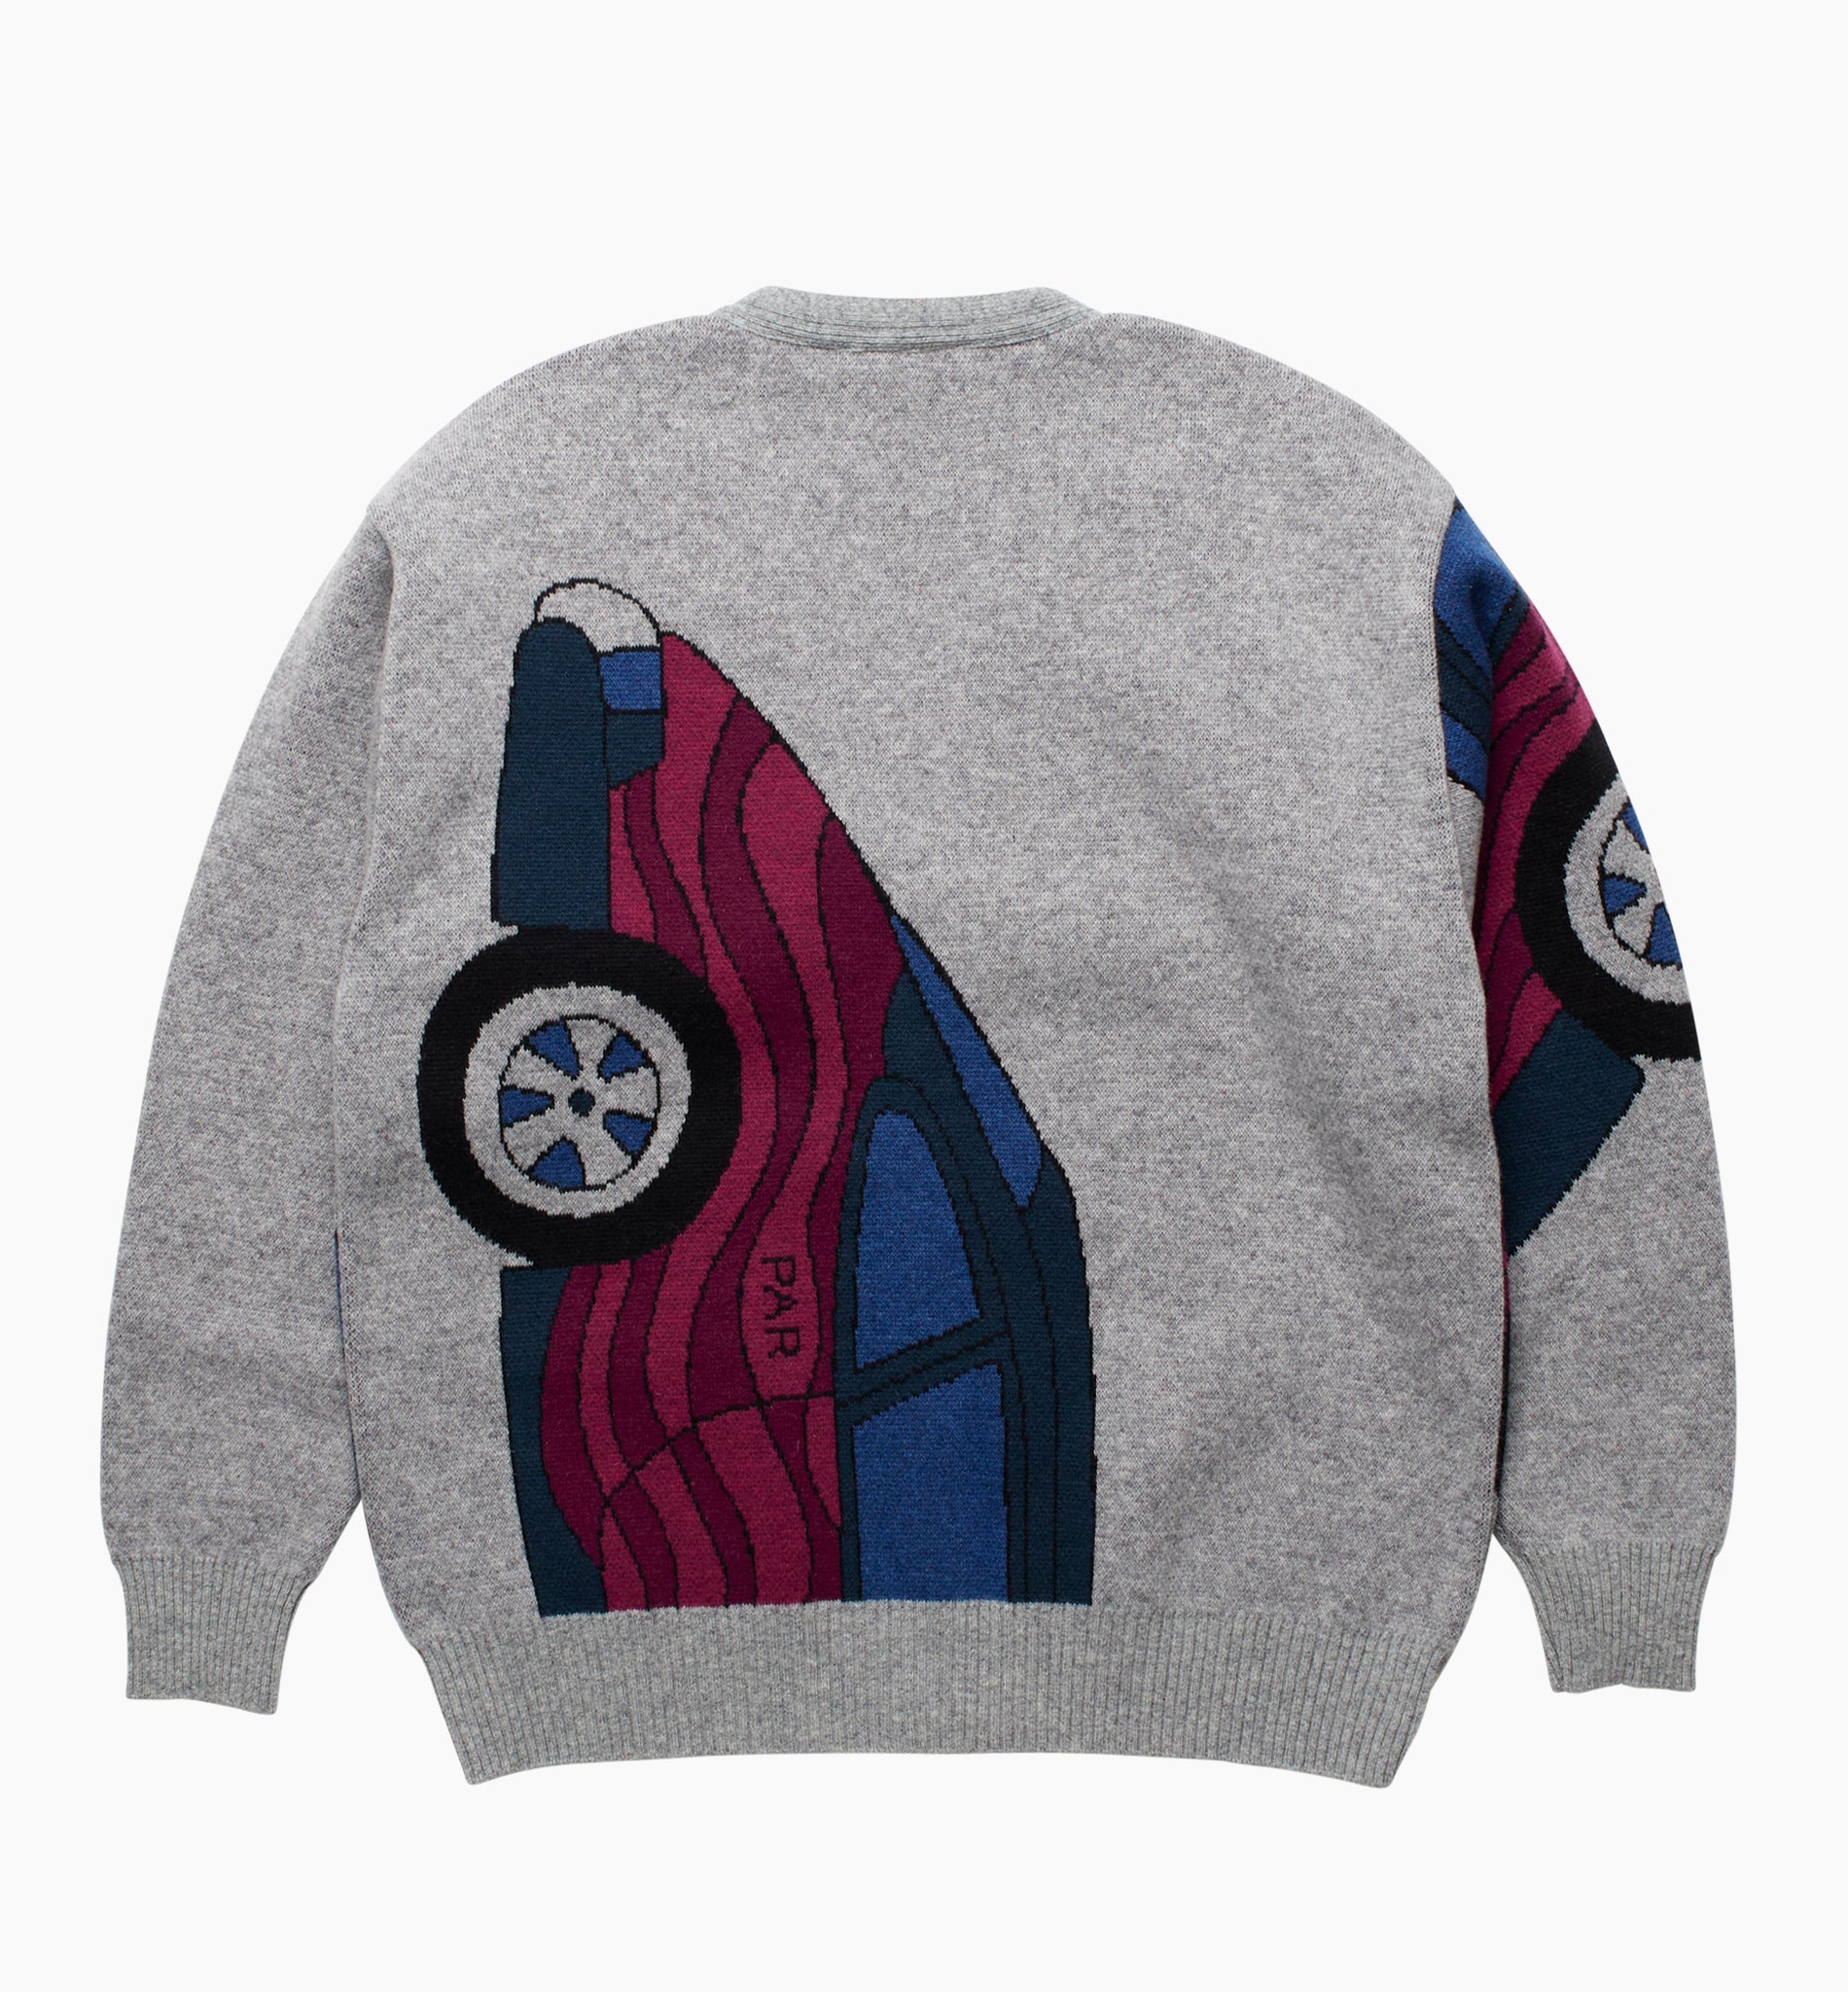 No Parking Knitted Cardigan